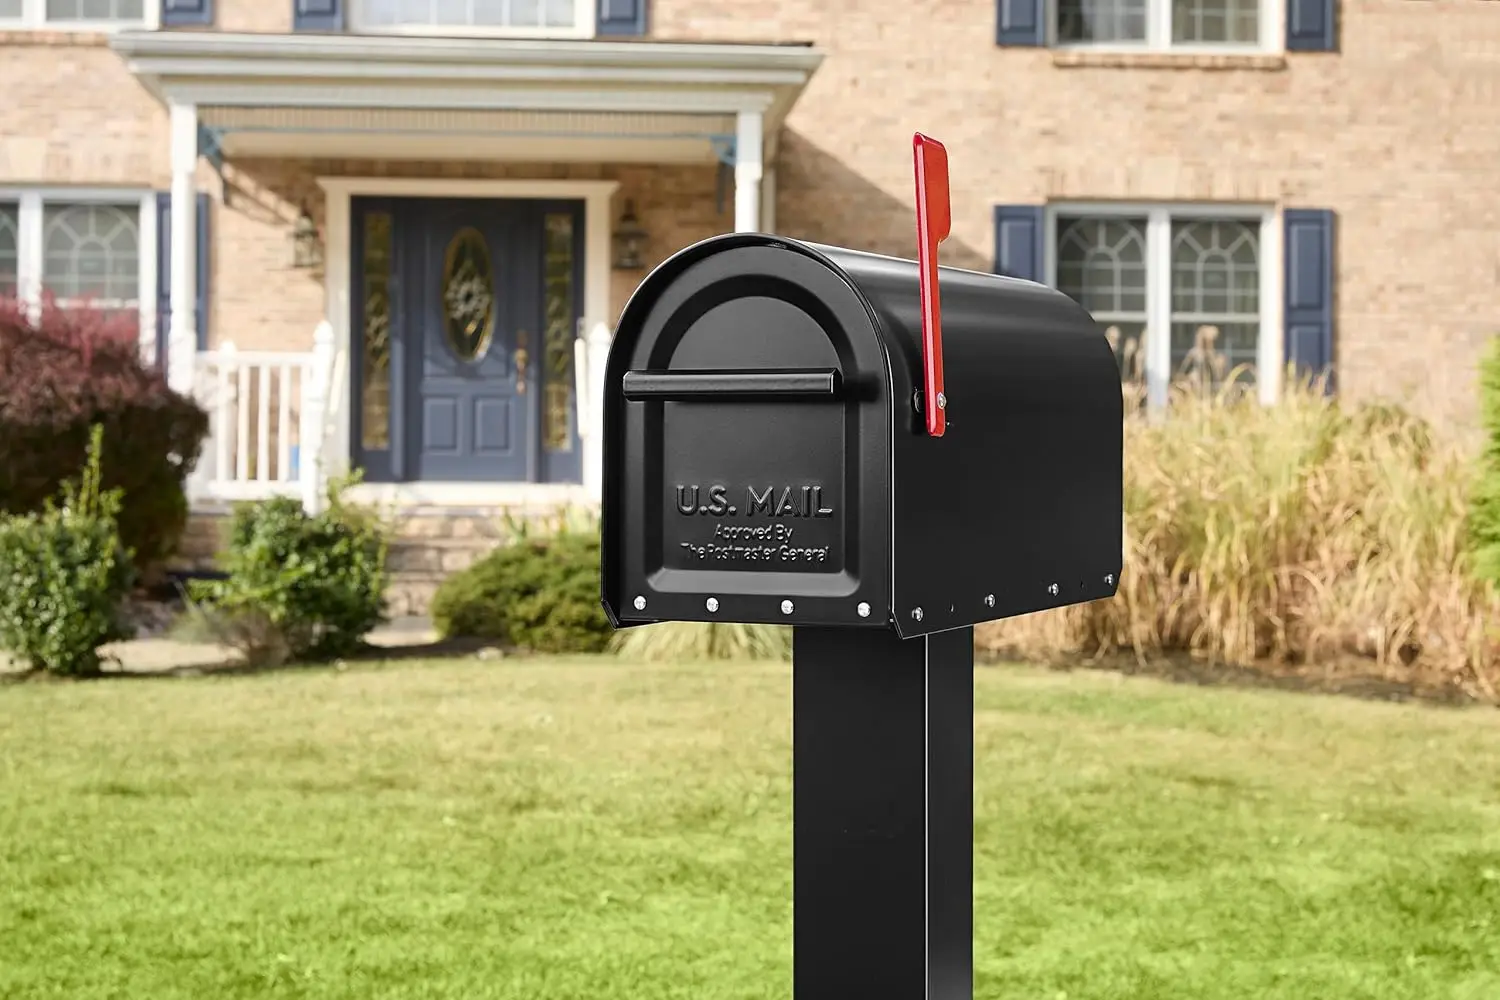 

5560B-R-10 Architectural Mailboxes Sequoia Post Mount Mailbox Large Black Made of galvanized steel to prevent corrosion